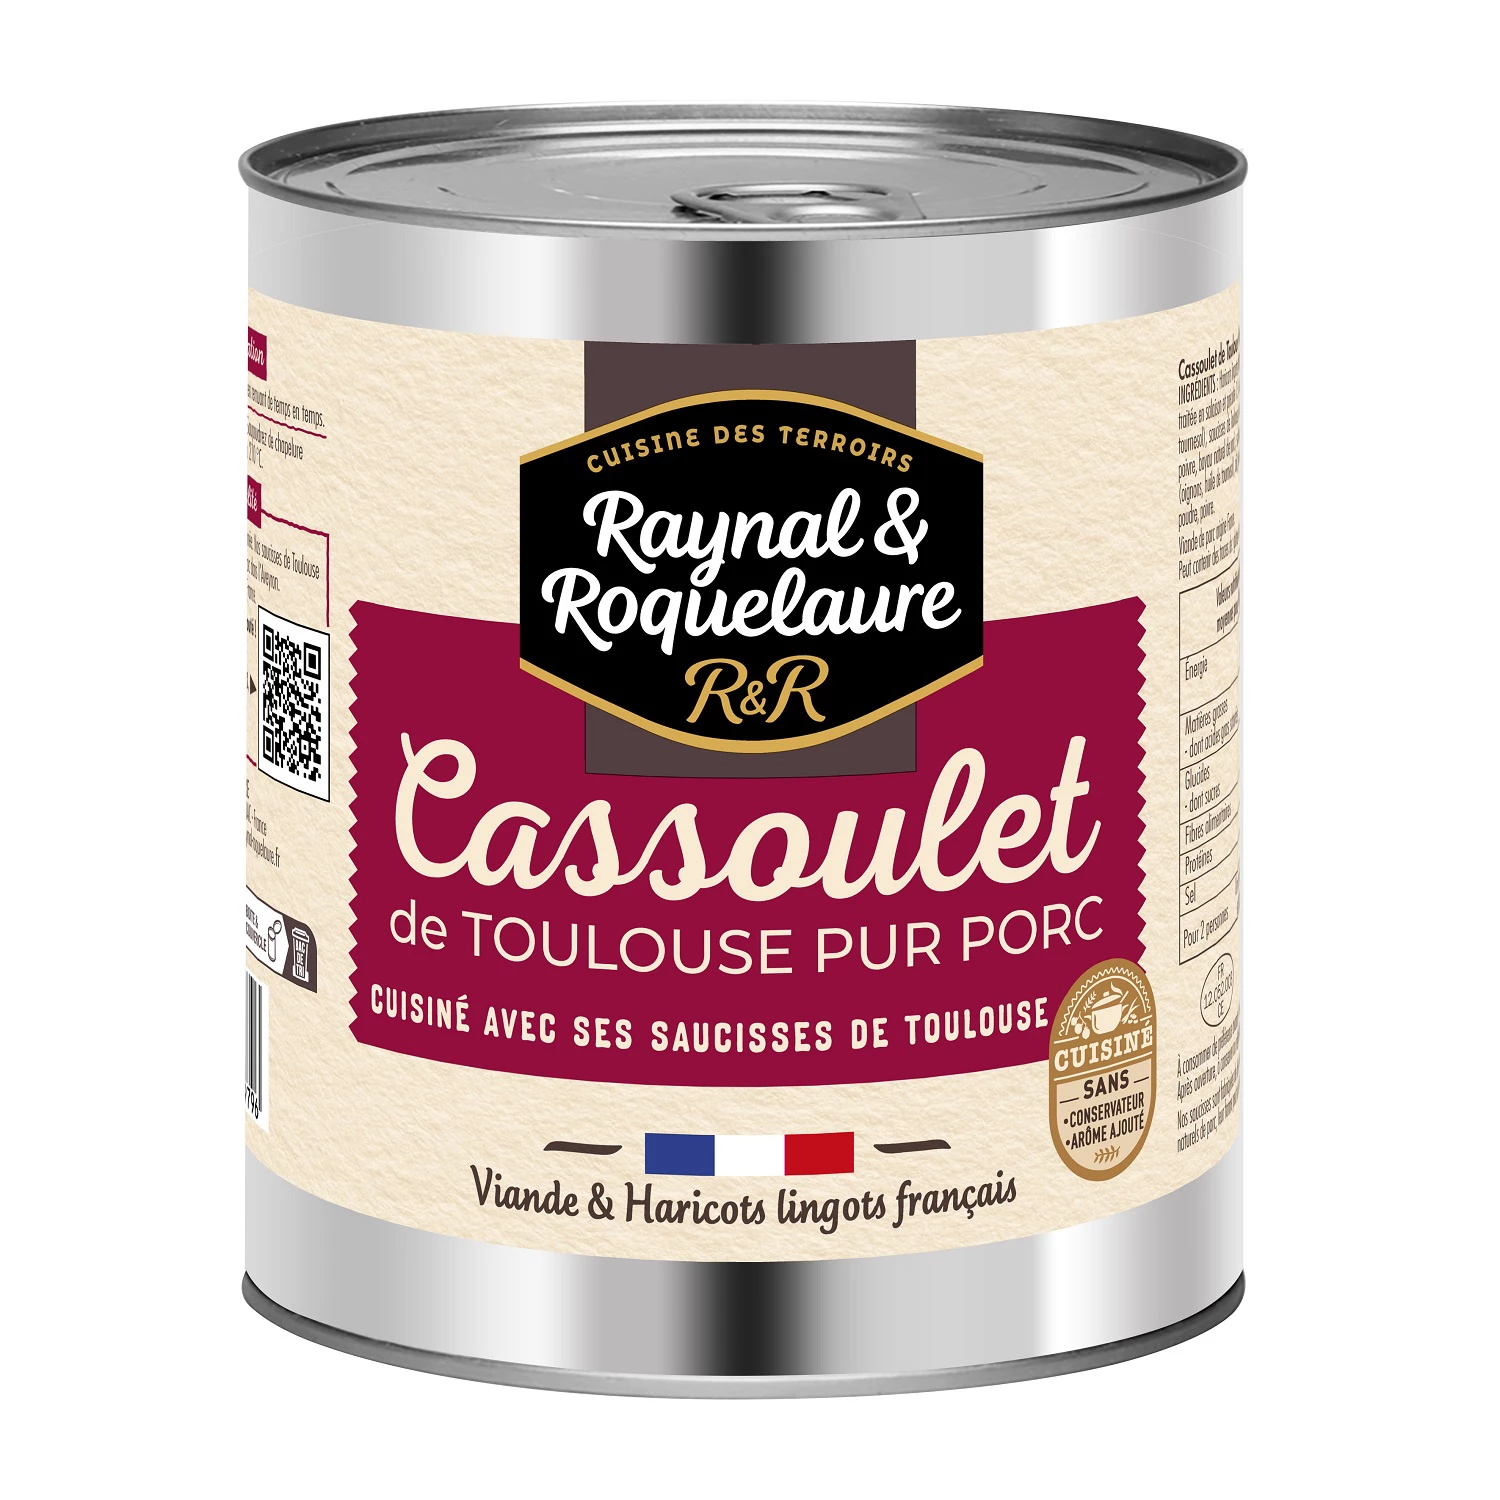 Toulouse cassoulet, 840g - RAYNAL & ROQUELAURE